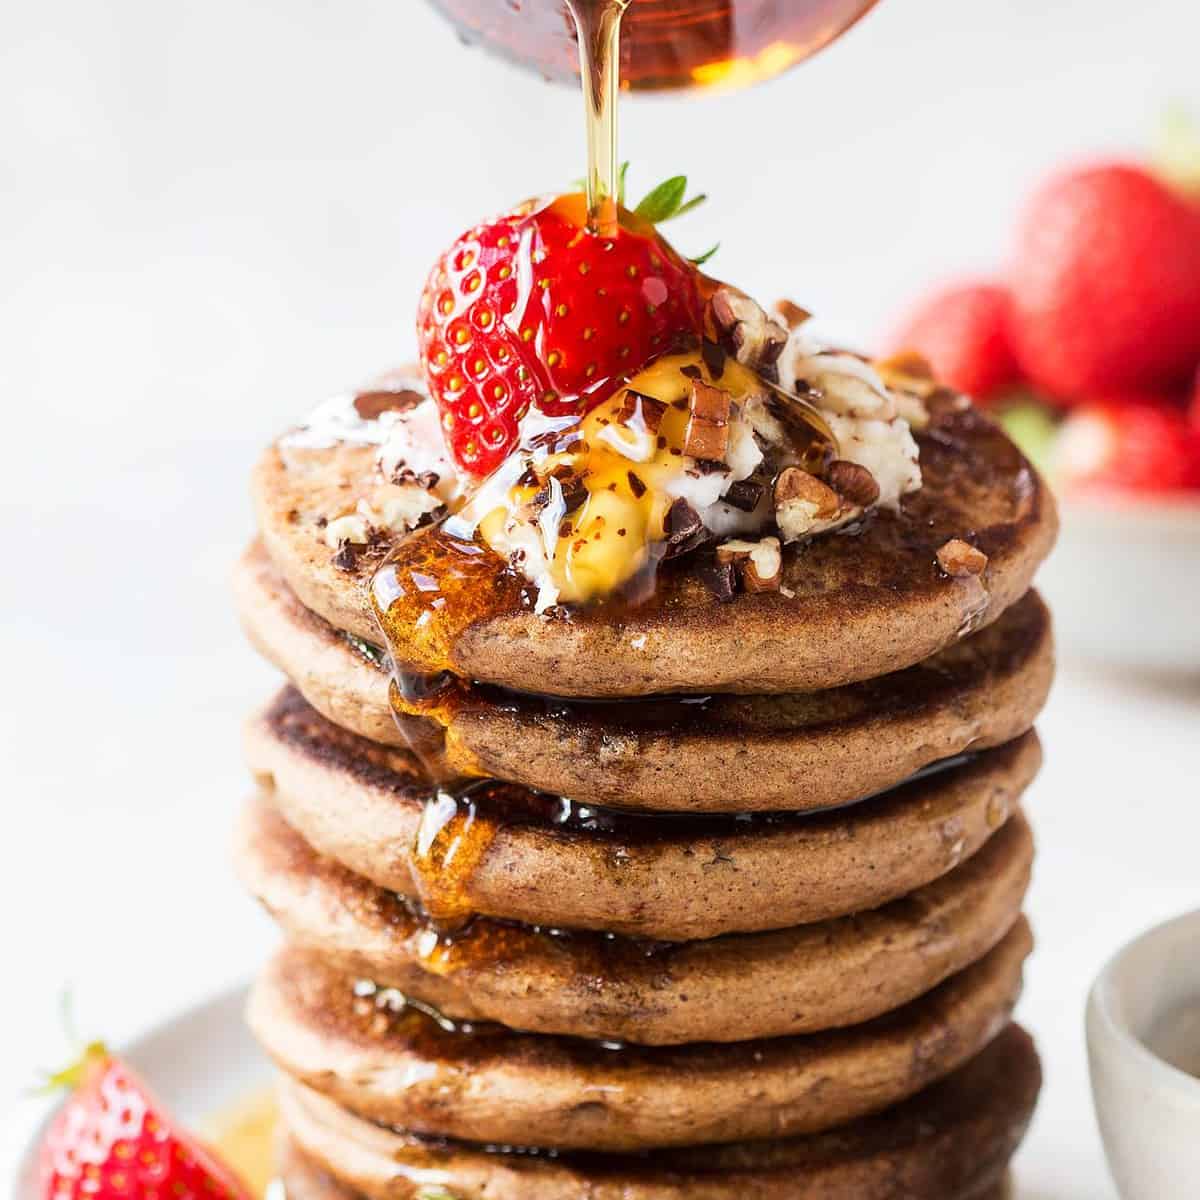  Our vegan buckwheat pancakes are also perfect for those with dietary restrictions - no eggs, no dairy, no gluten